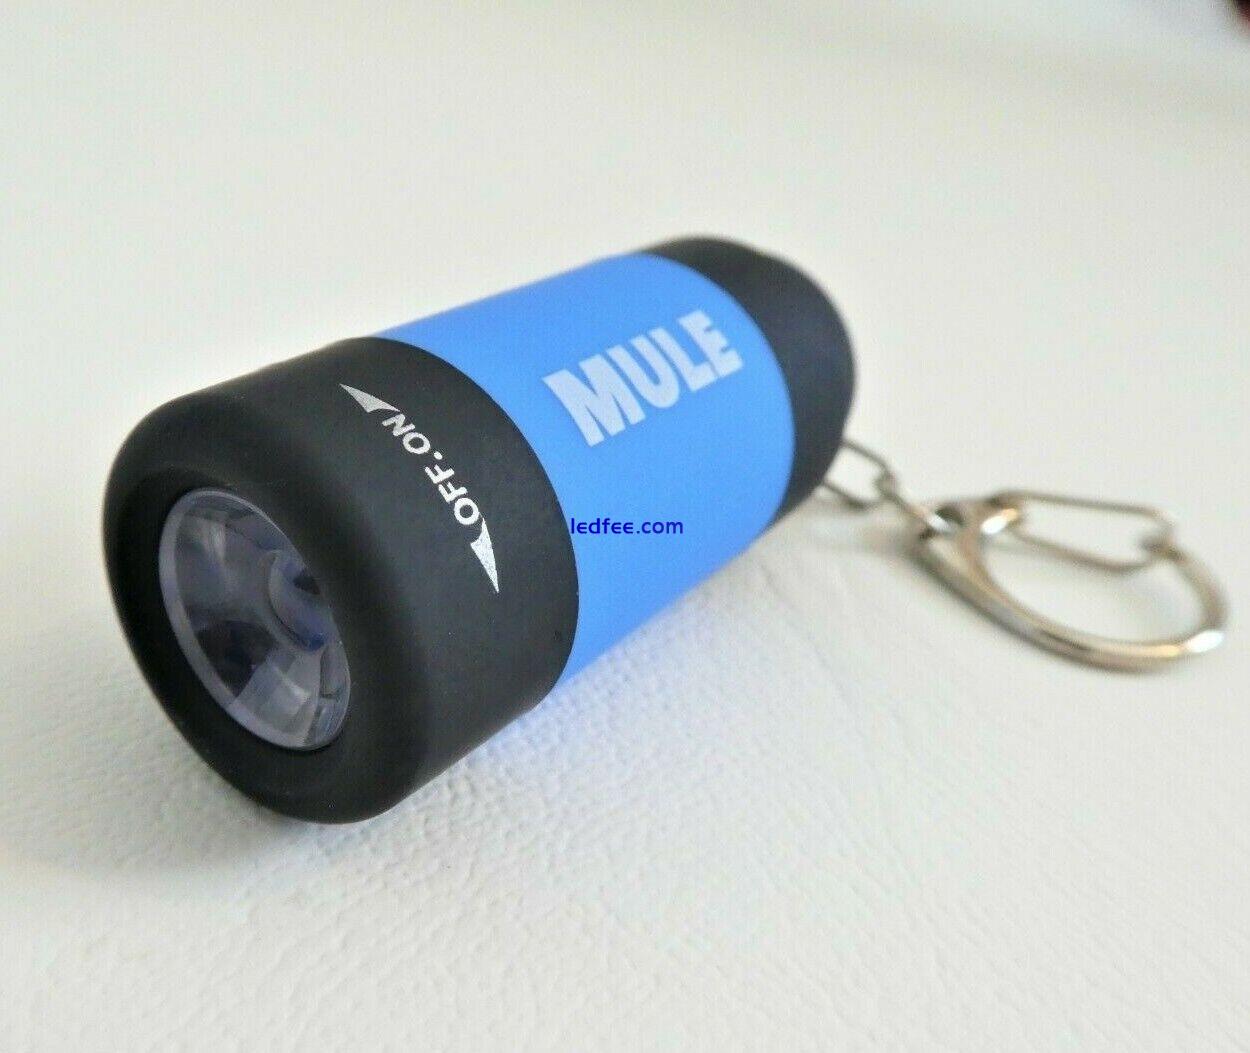 MULE Blue USB Rechargeable water resistant inspection torch key-ring EDC 3 